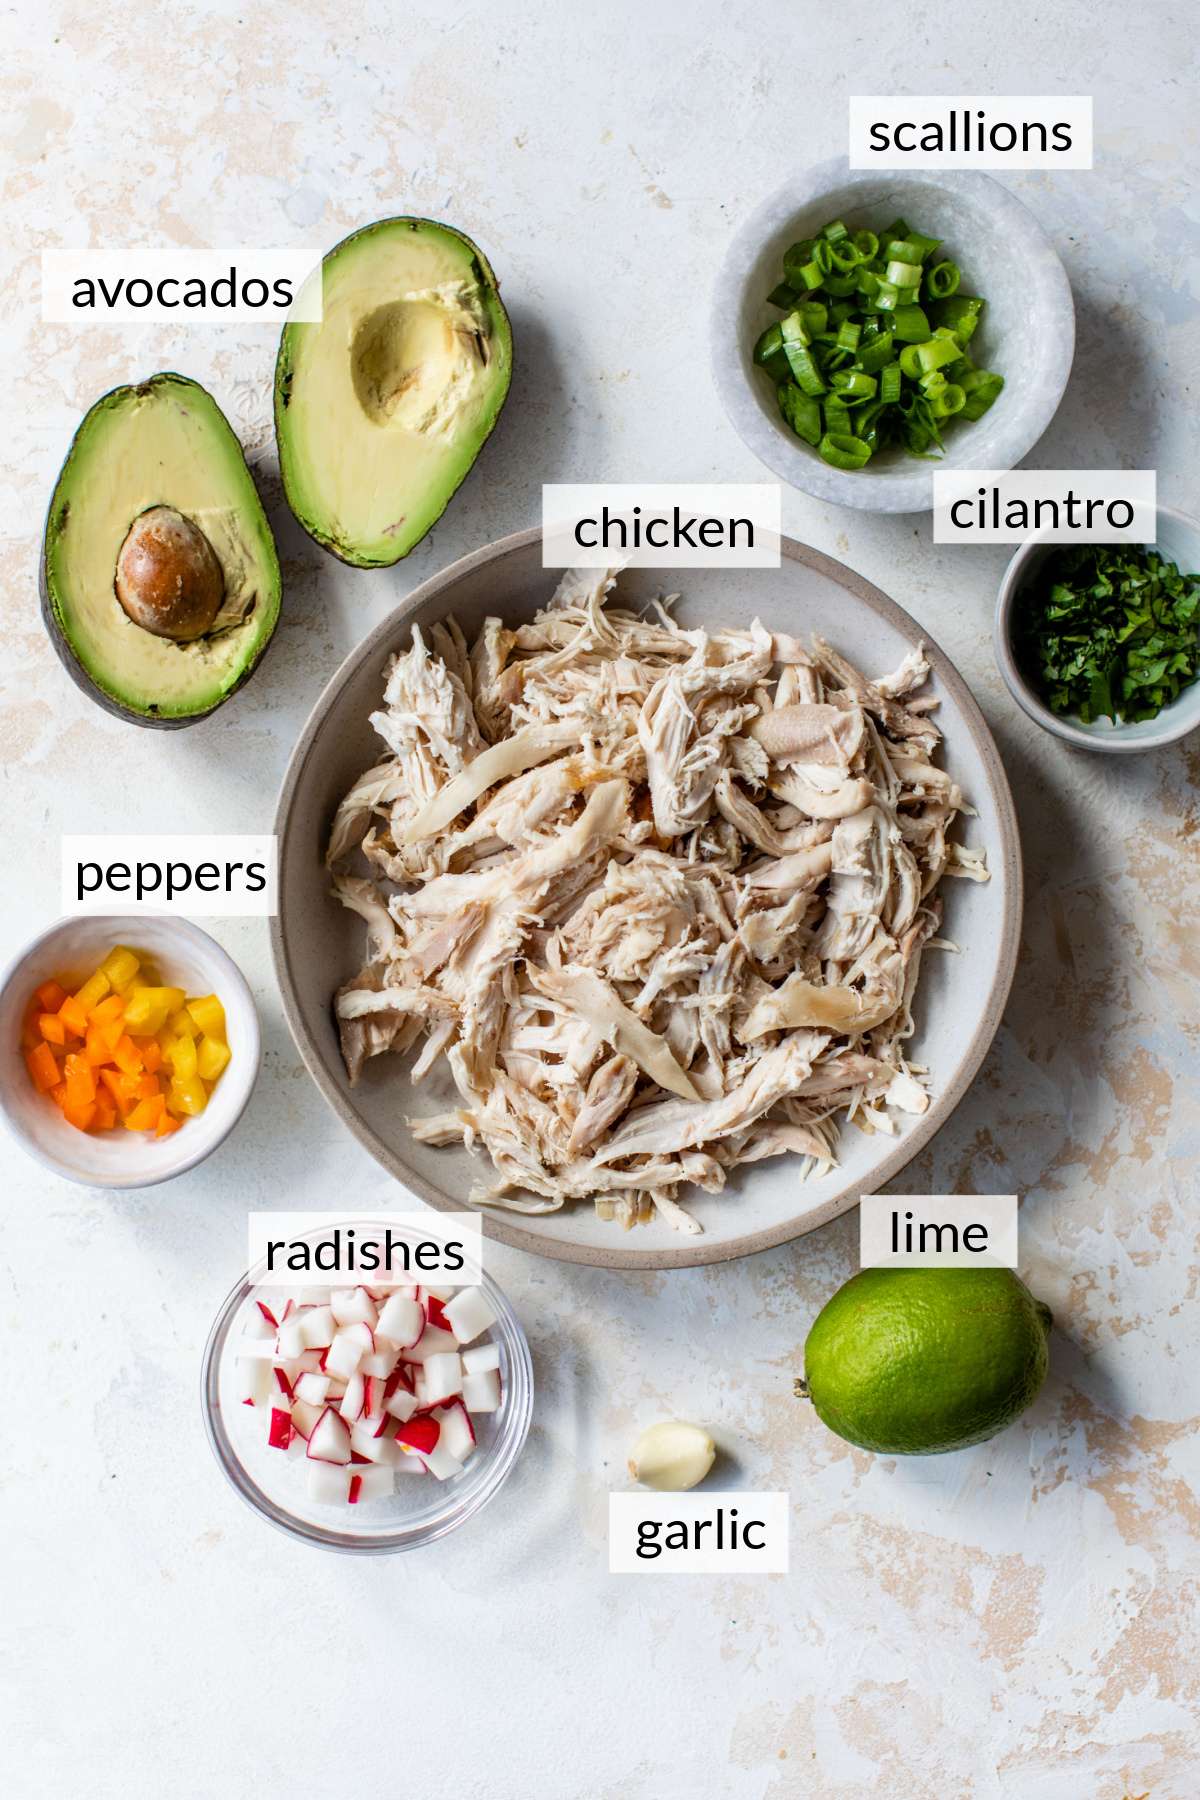 Shredded chicken, avocado, radishes, peppers and cilantro divided into small bowls.